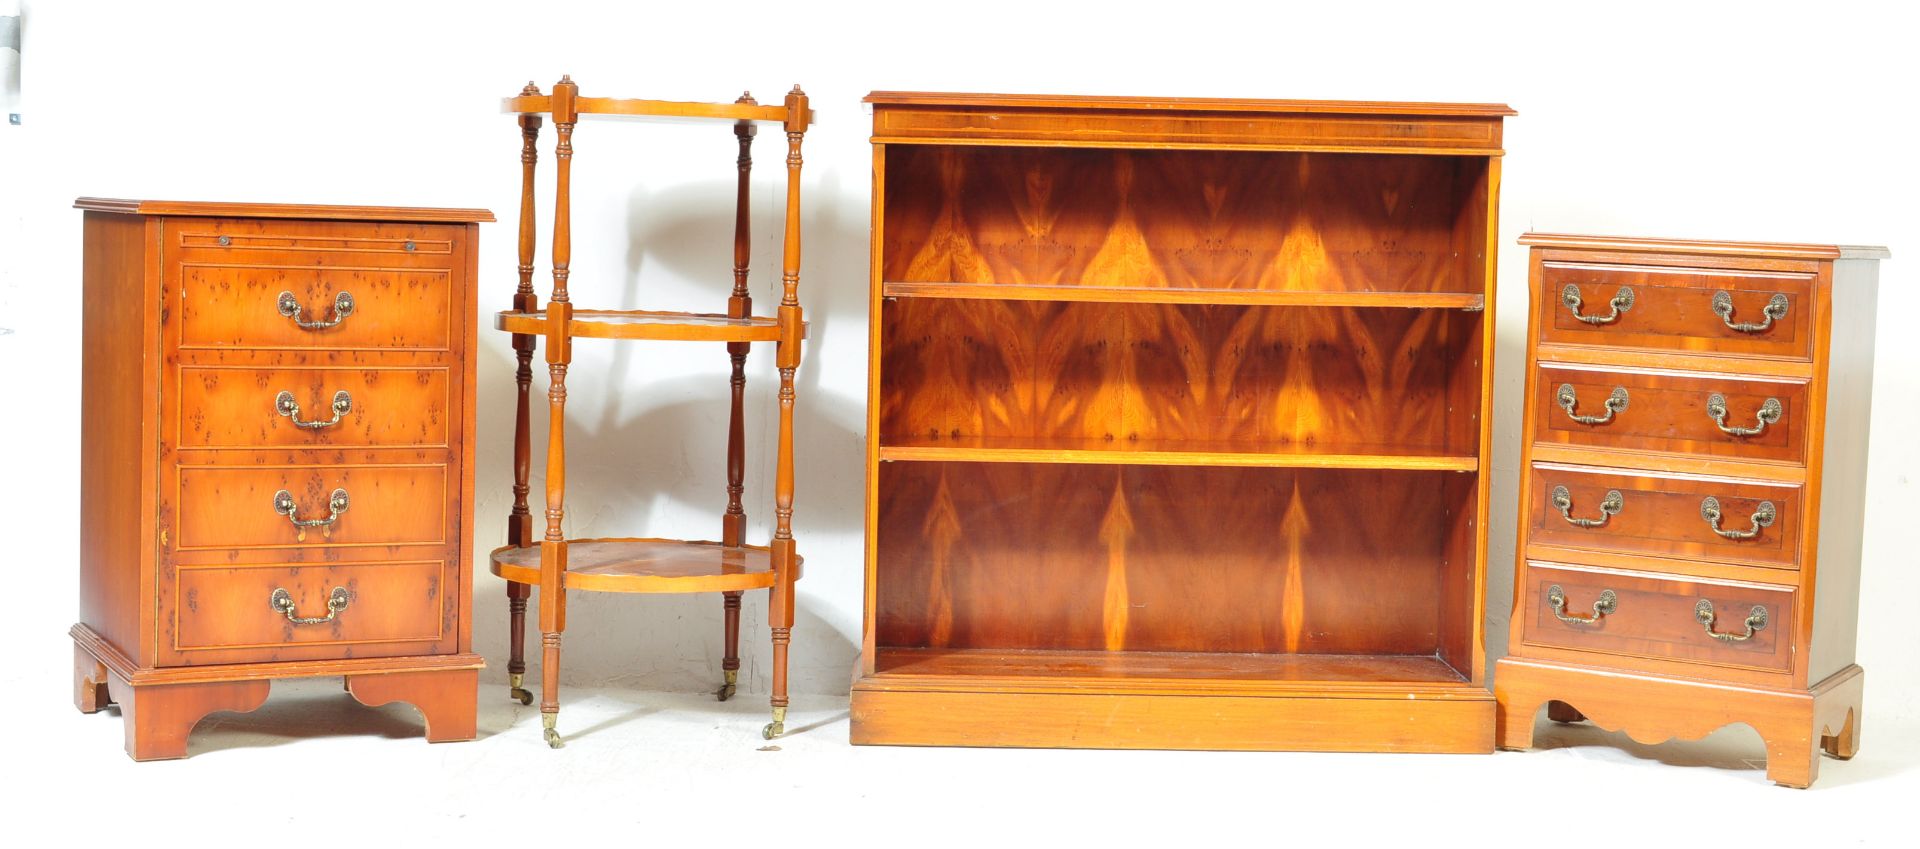 COLLECTION OF YEW WOOD REGENCY FURNITURE